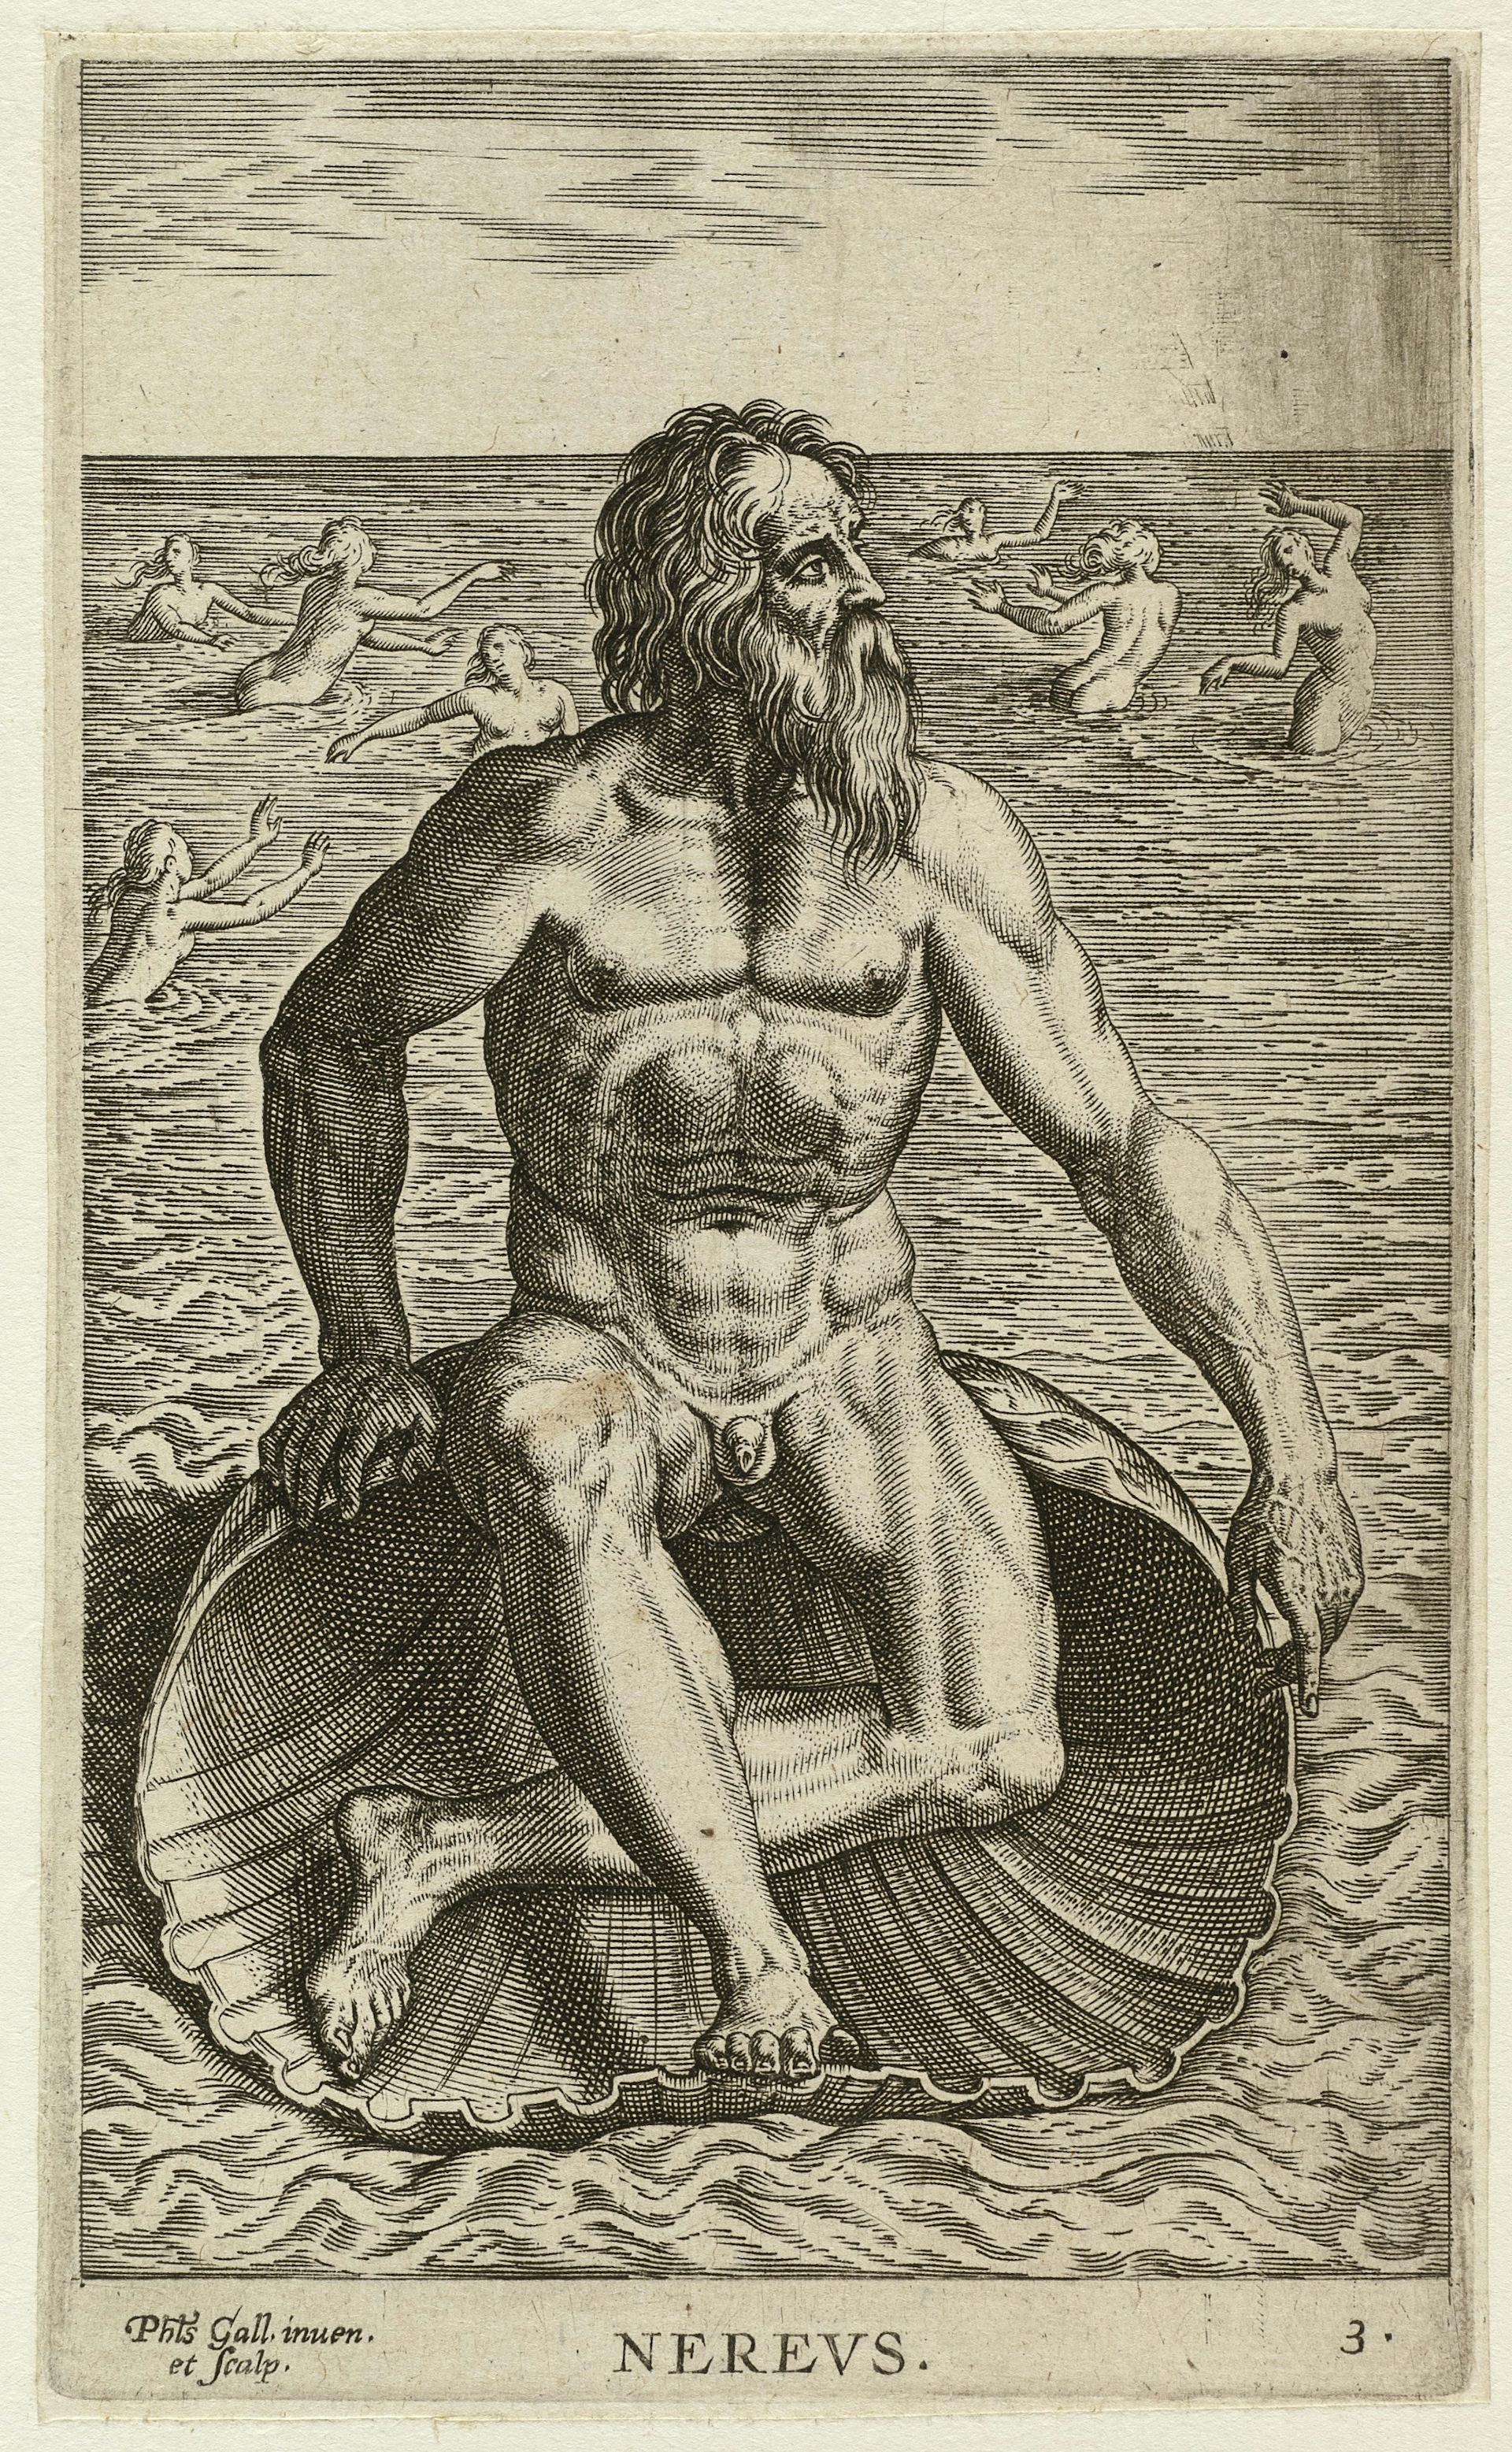 Illustration of Nereus by Philips Galle